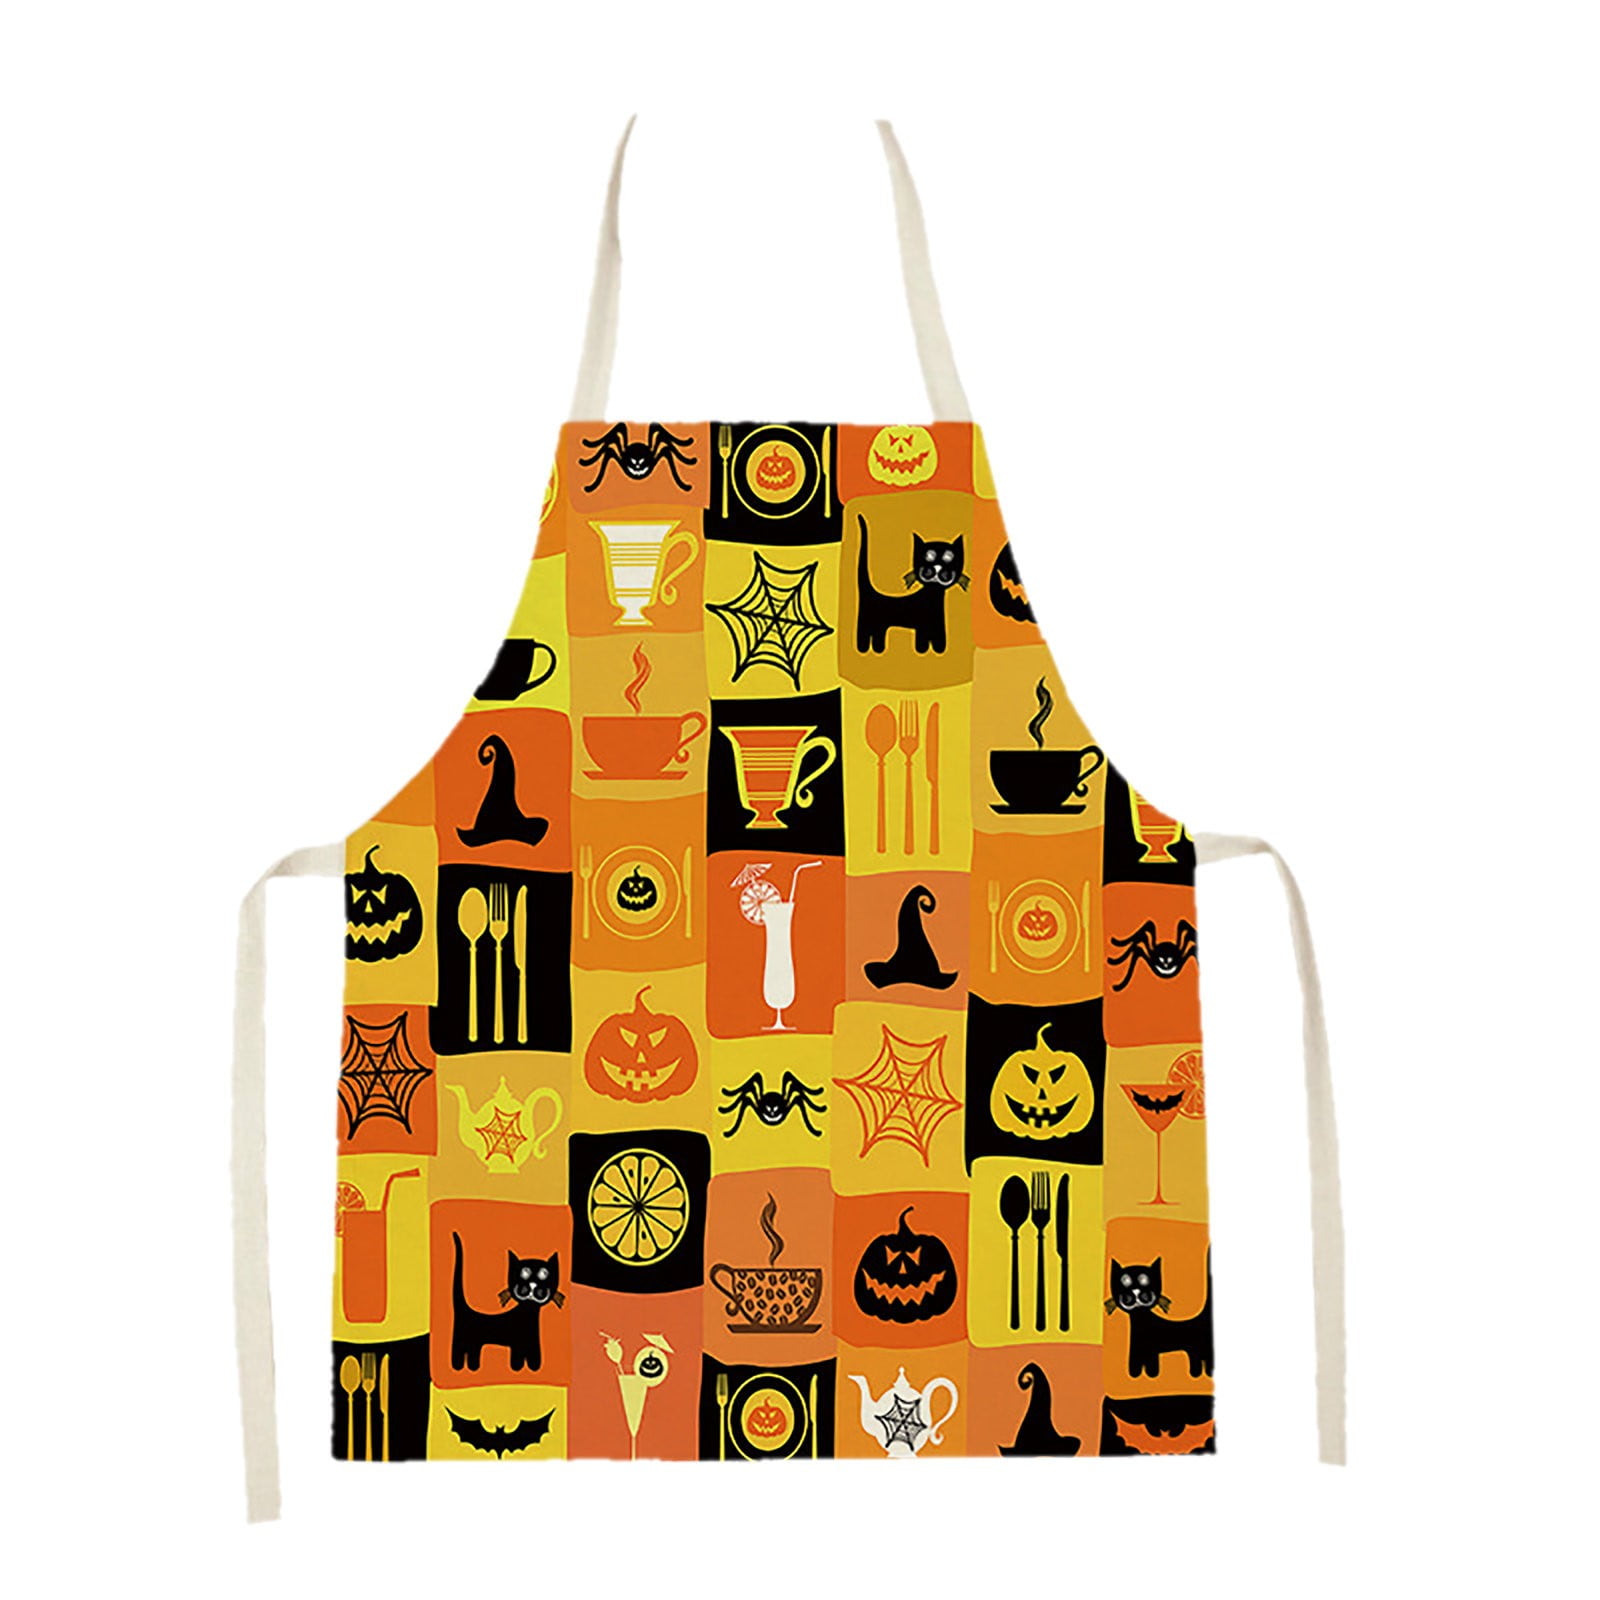 Pianpianzi Apron Patterns for Sewing Adjustable Neck Frilly Apron Half  Apron Man Apron for Working Set Adult Printed Kitchen Family Family  Christmas